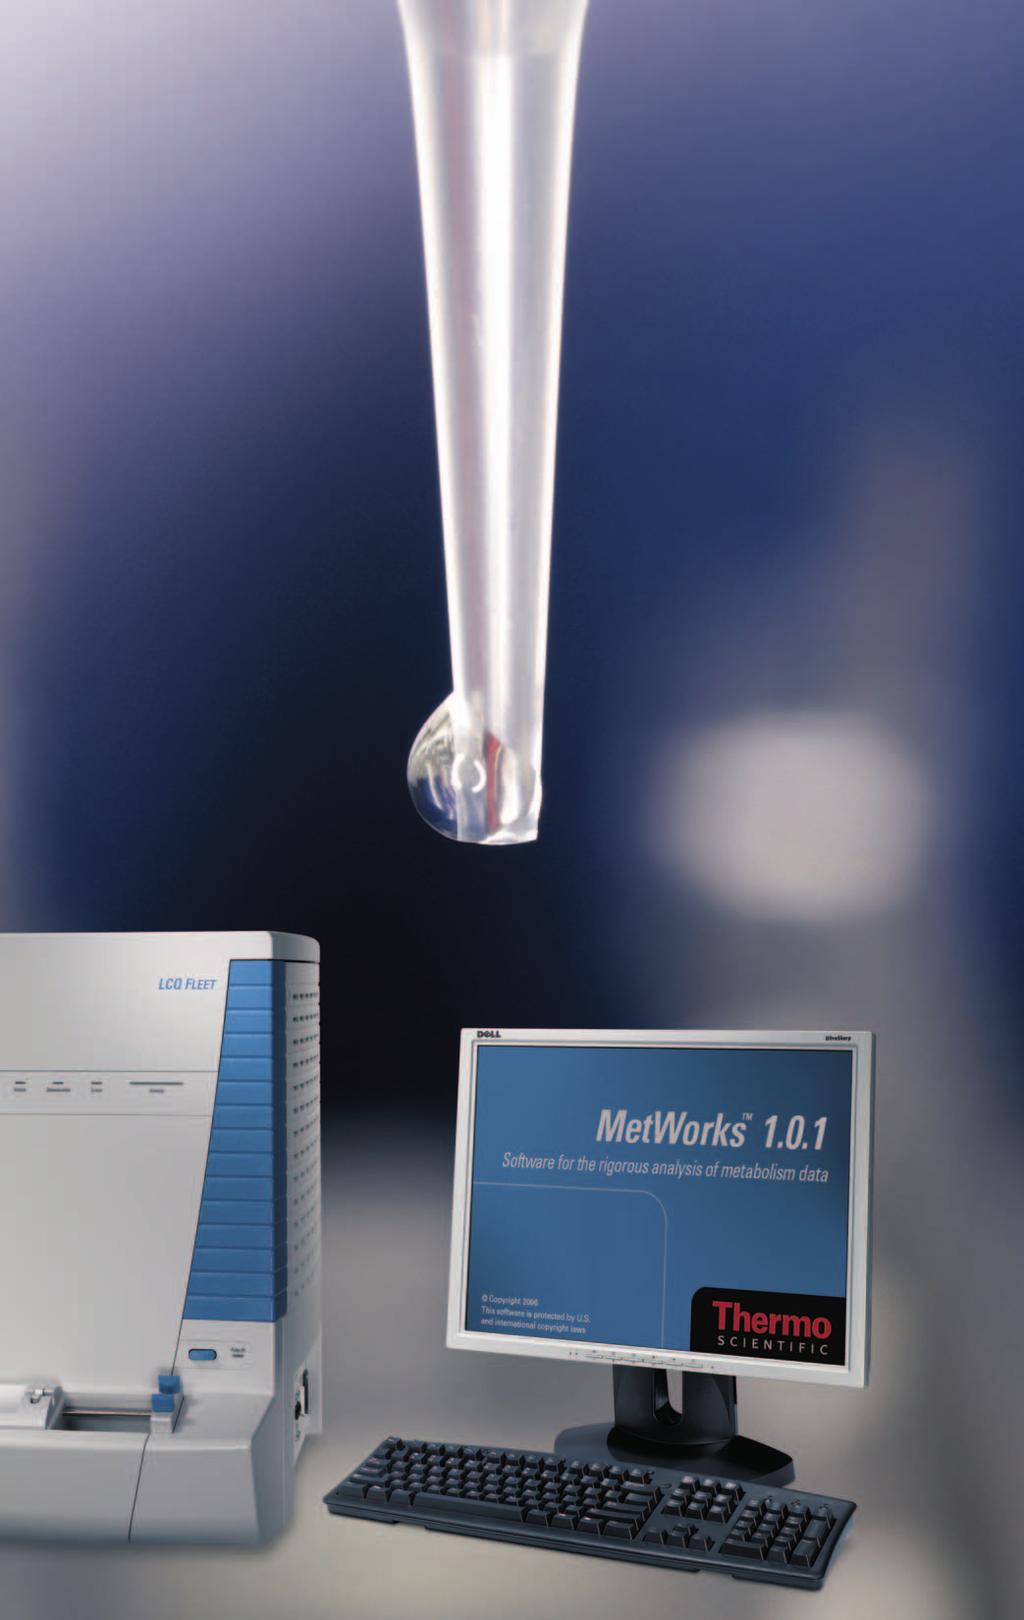 Intelligent Analysis Stable and easy-to-use Xcalibur software provides automated LC-MS/MS system control and data acquisition for complex sample analysis.